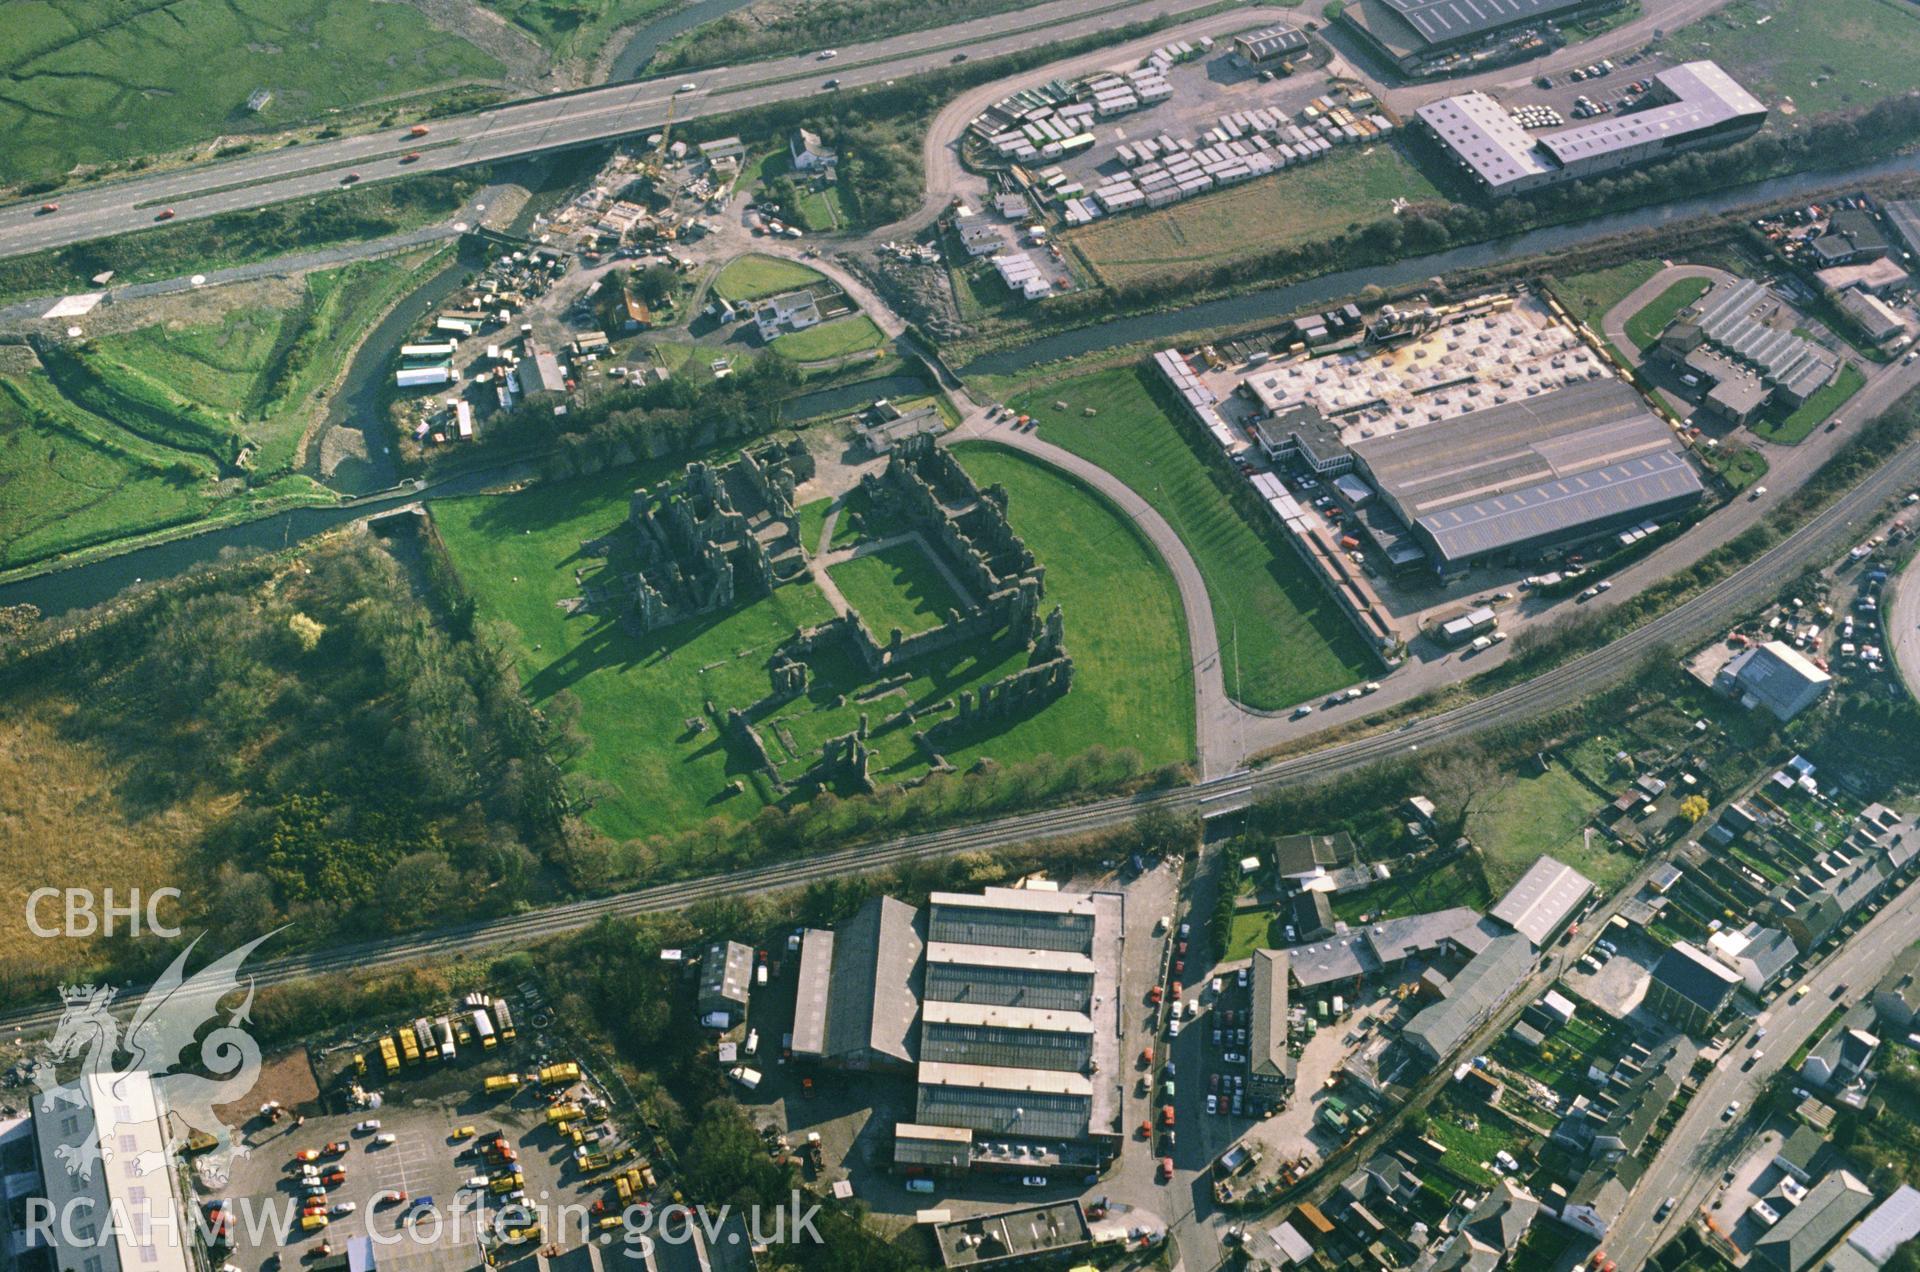 RCAHMW colour slide oblique aerial photograph of Neath Abbey, taken on 25/03/1991 by CR Musson